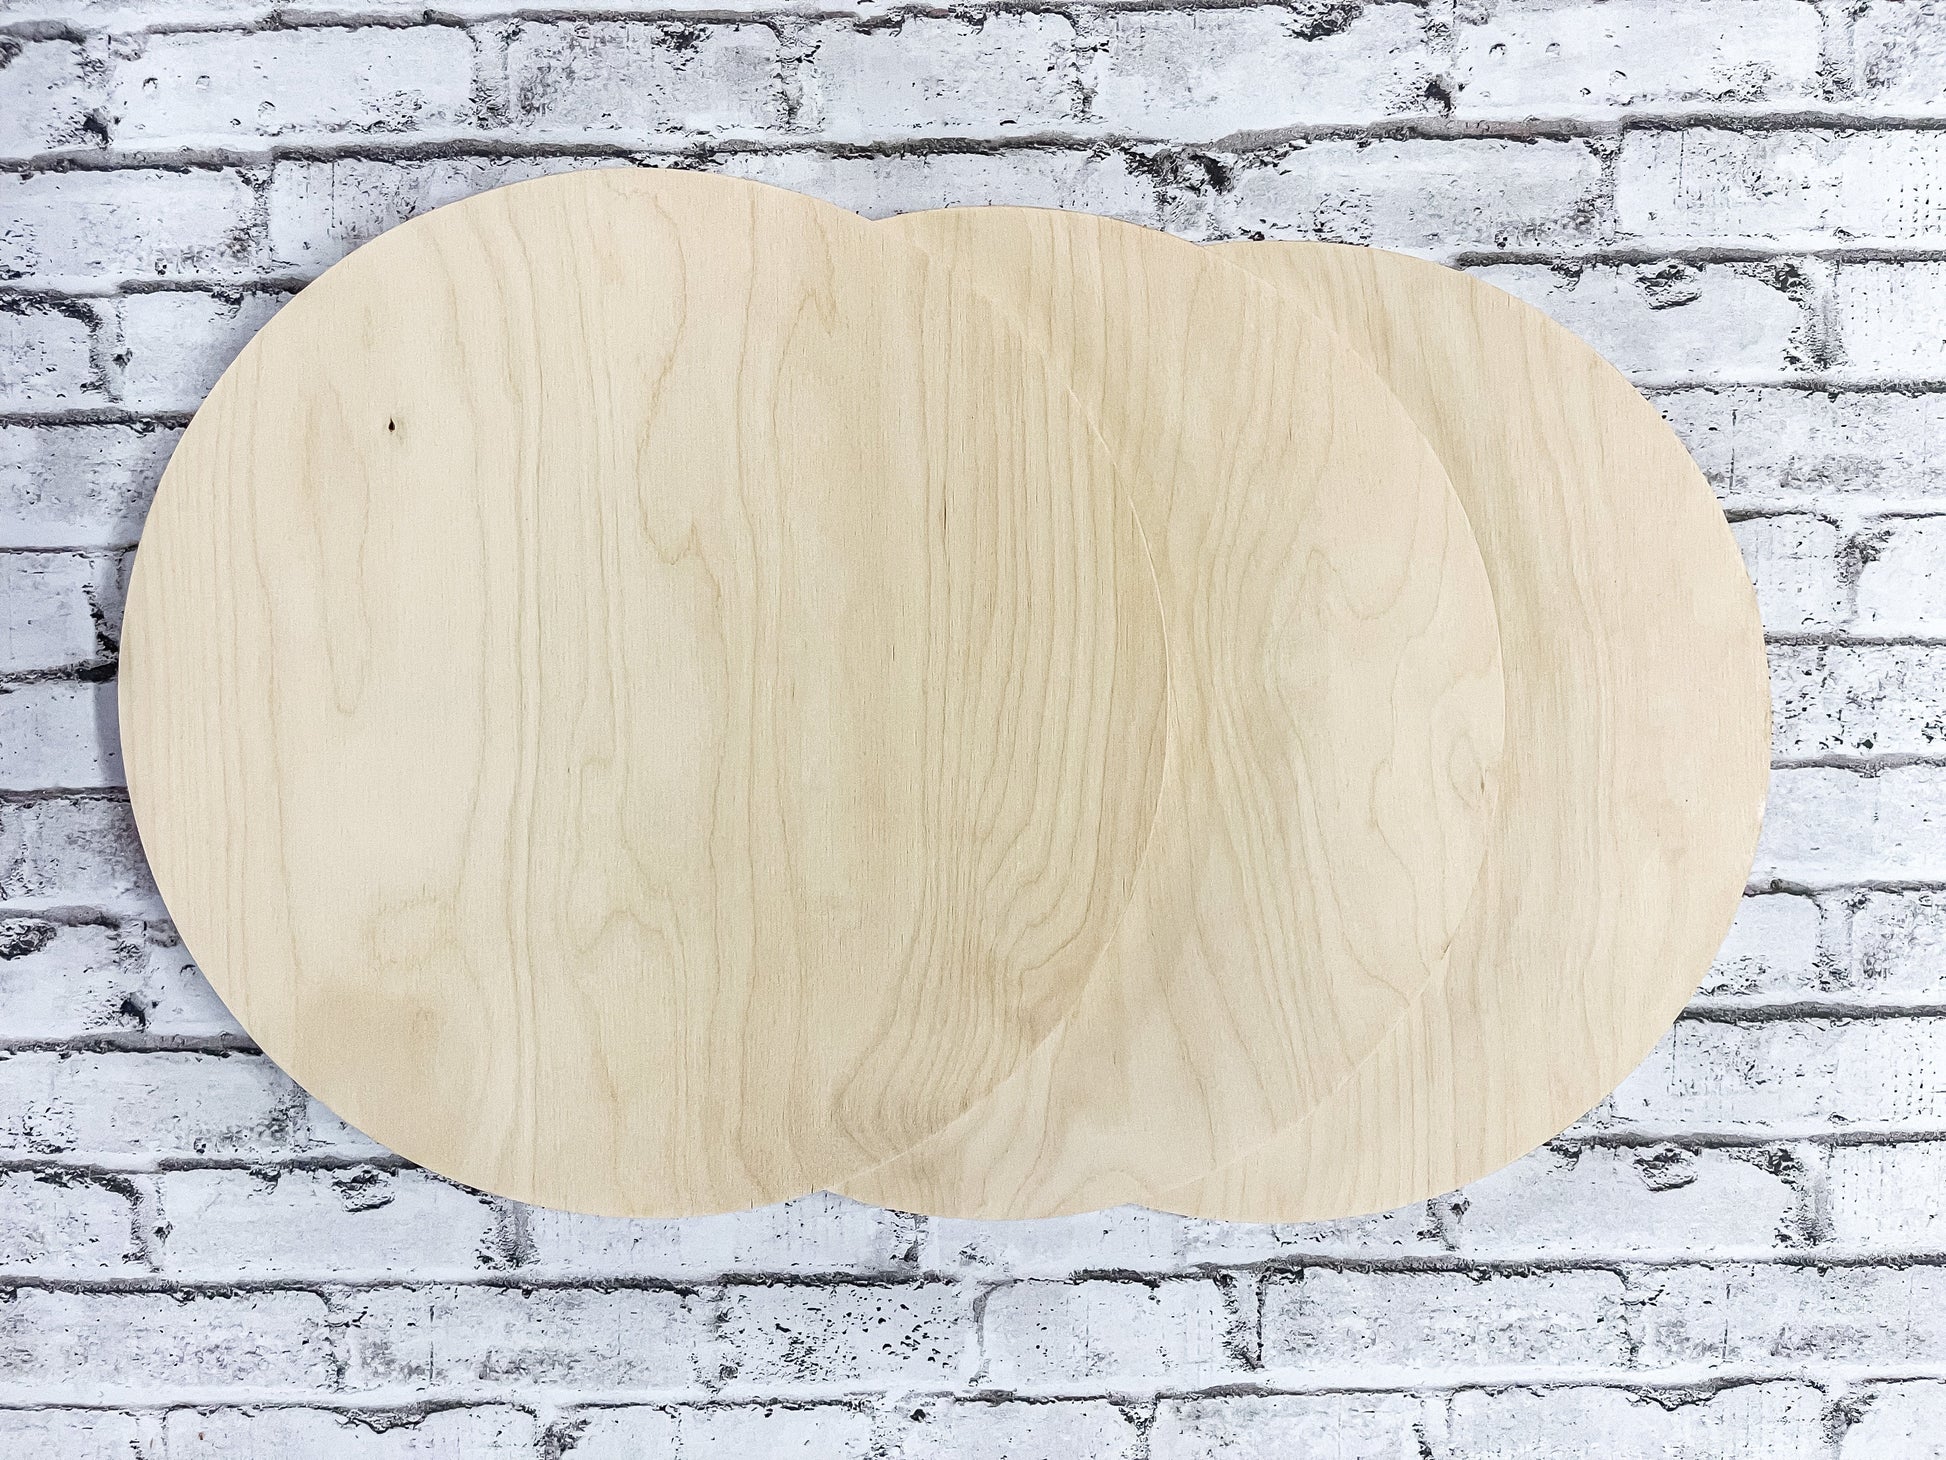 1 Thick 18'' in Diameter Blank Wood Rounds 